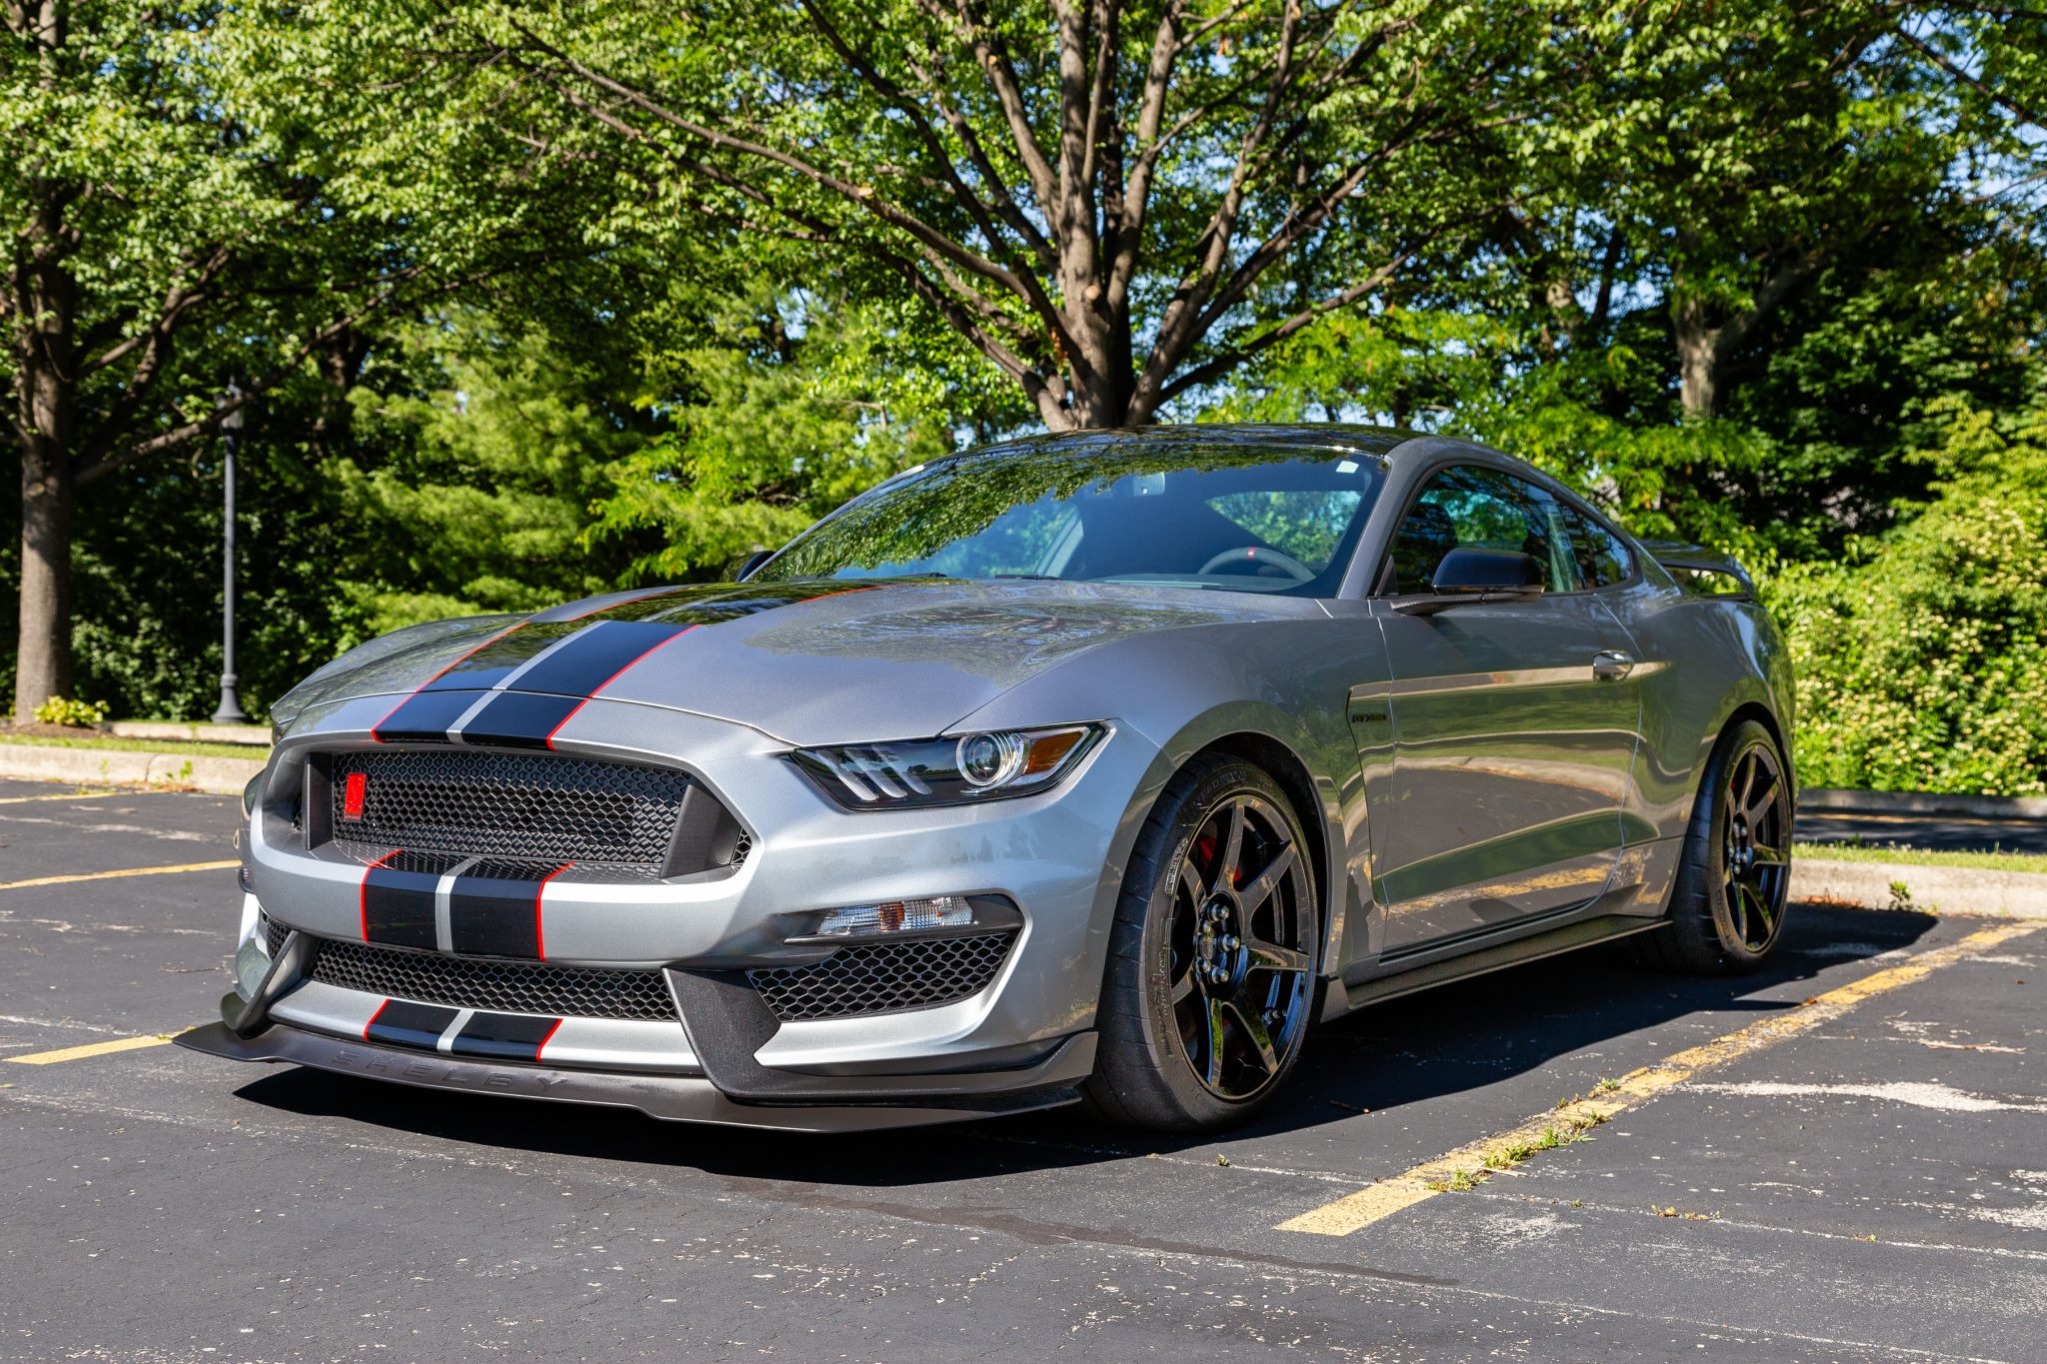 Used 6k-Mile 2020 Ford Mustang Shelby GT350R Review